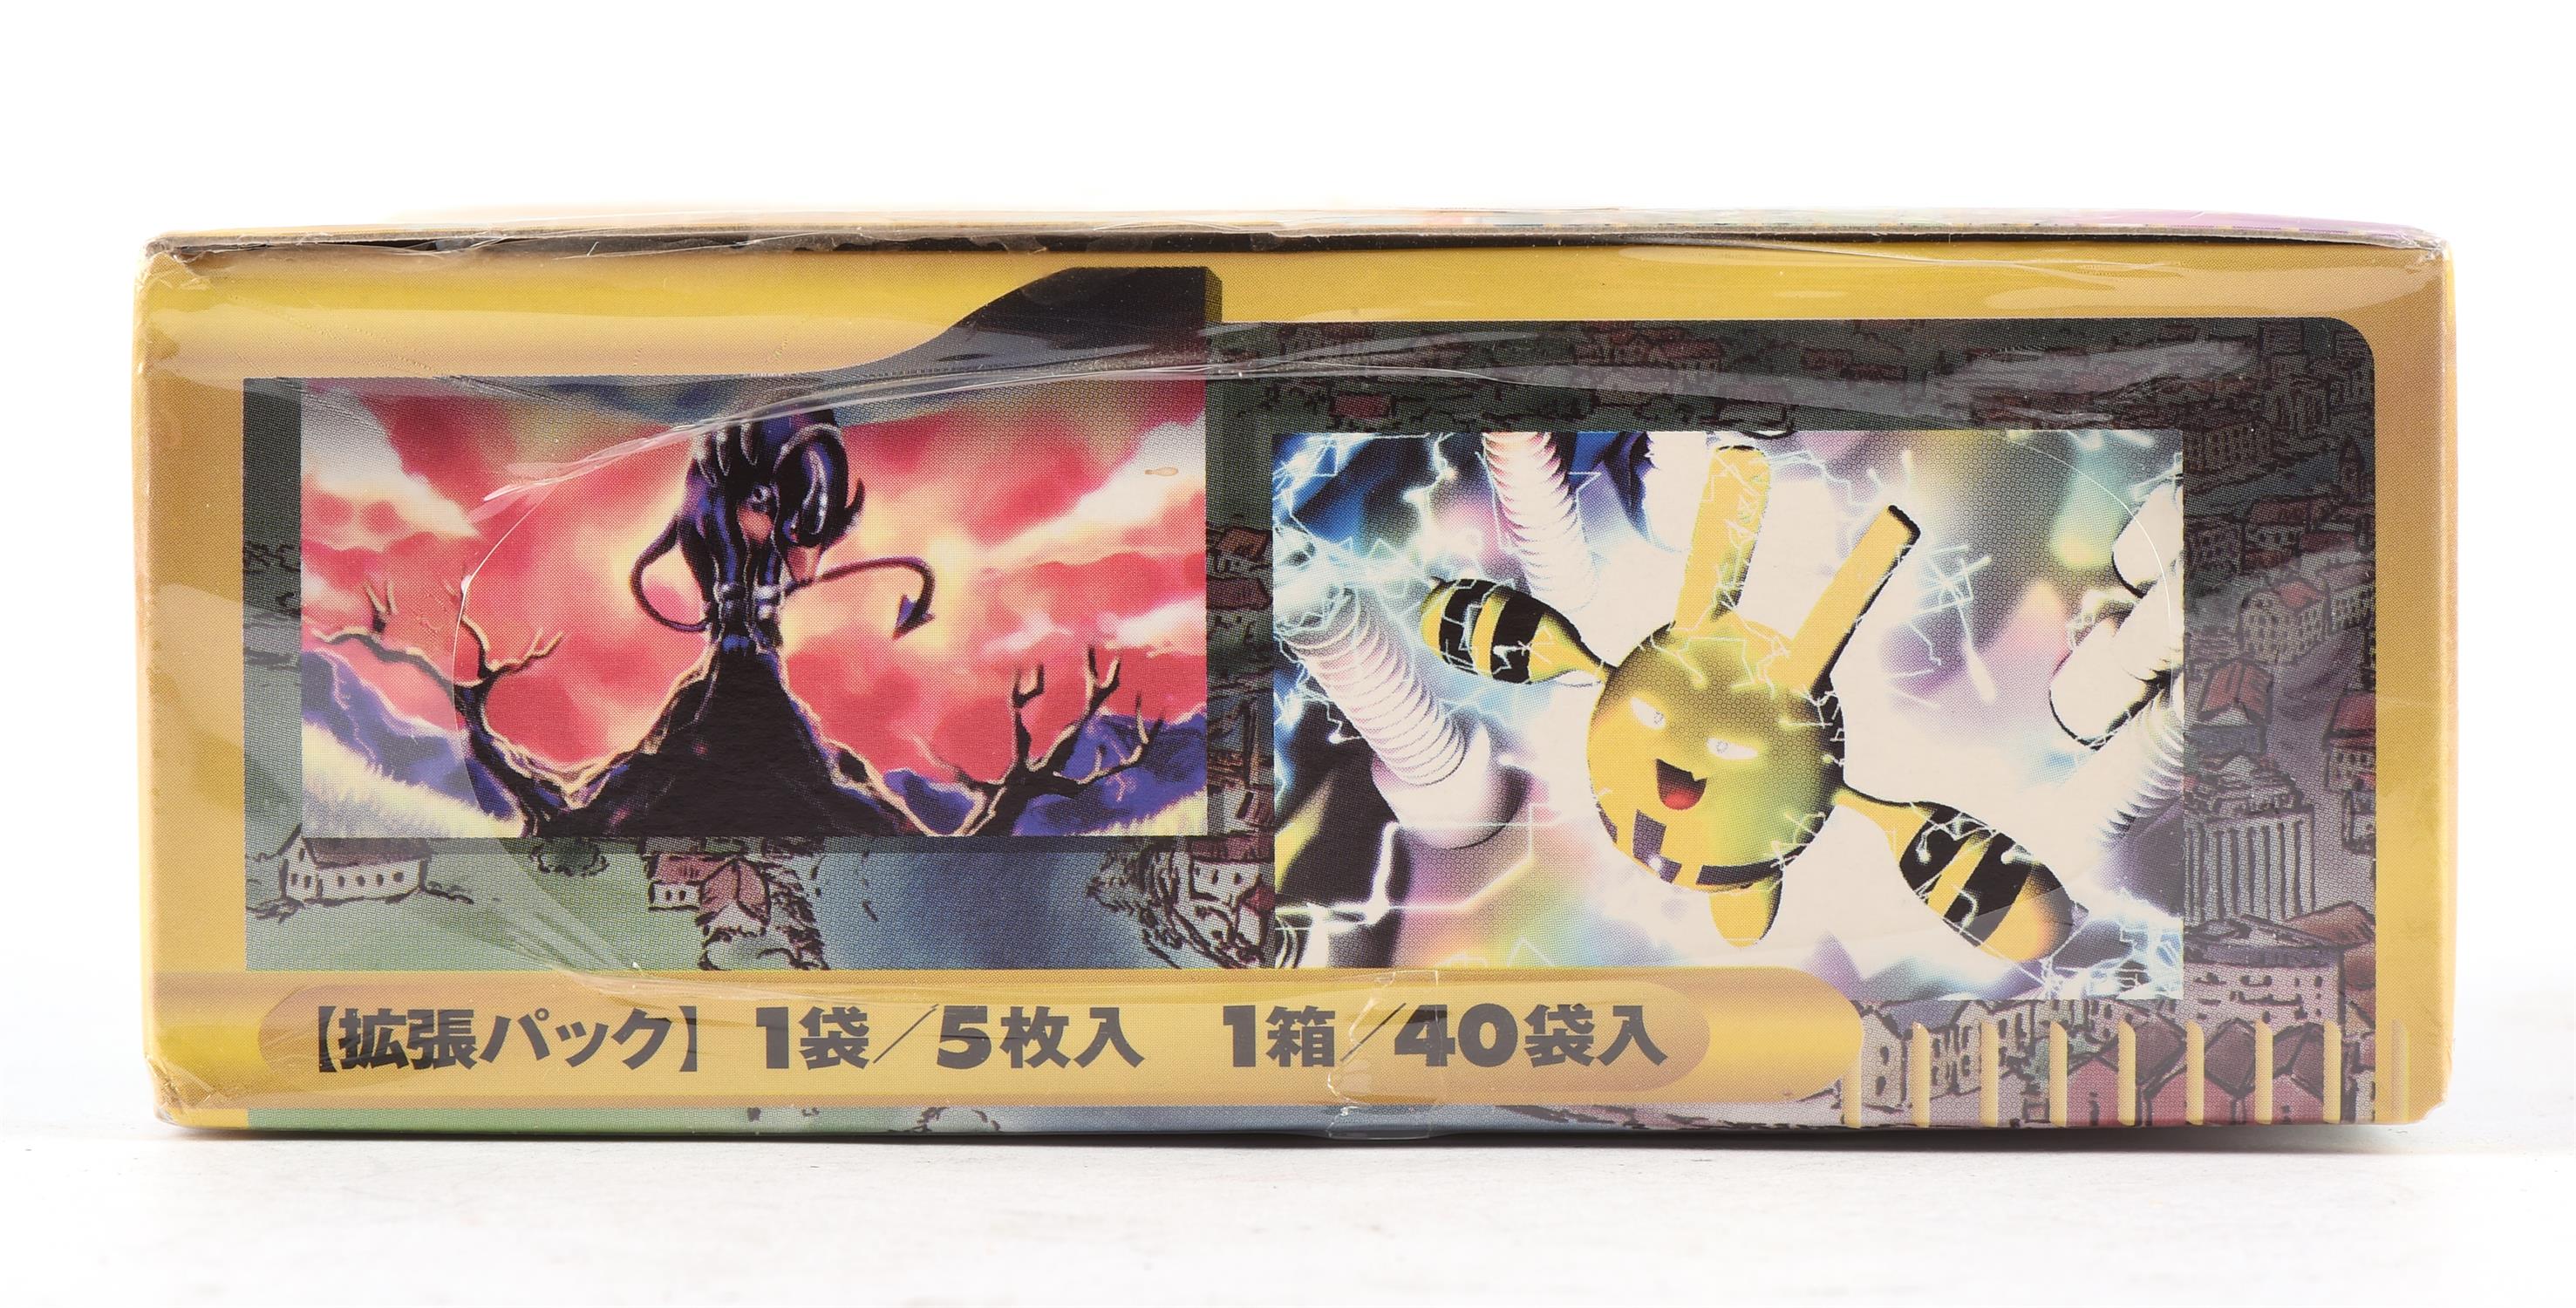 Pokemon TCG. Japanese Town On No Map (Aquapolis), 2002 first edition e-series sealed booster box of - Image 6 of 7